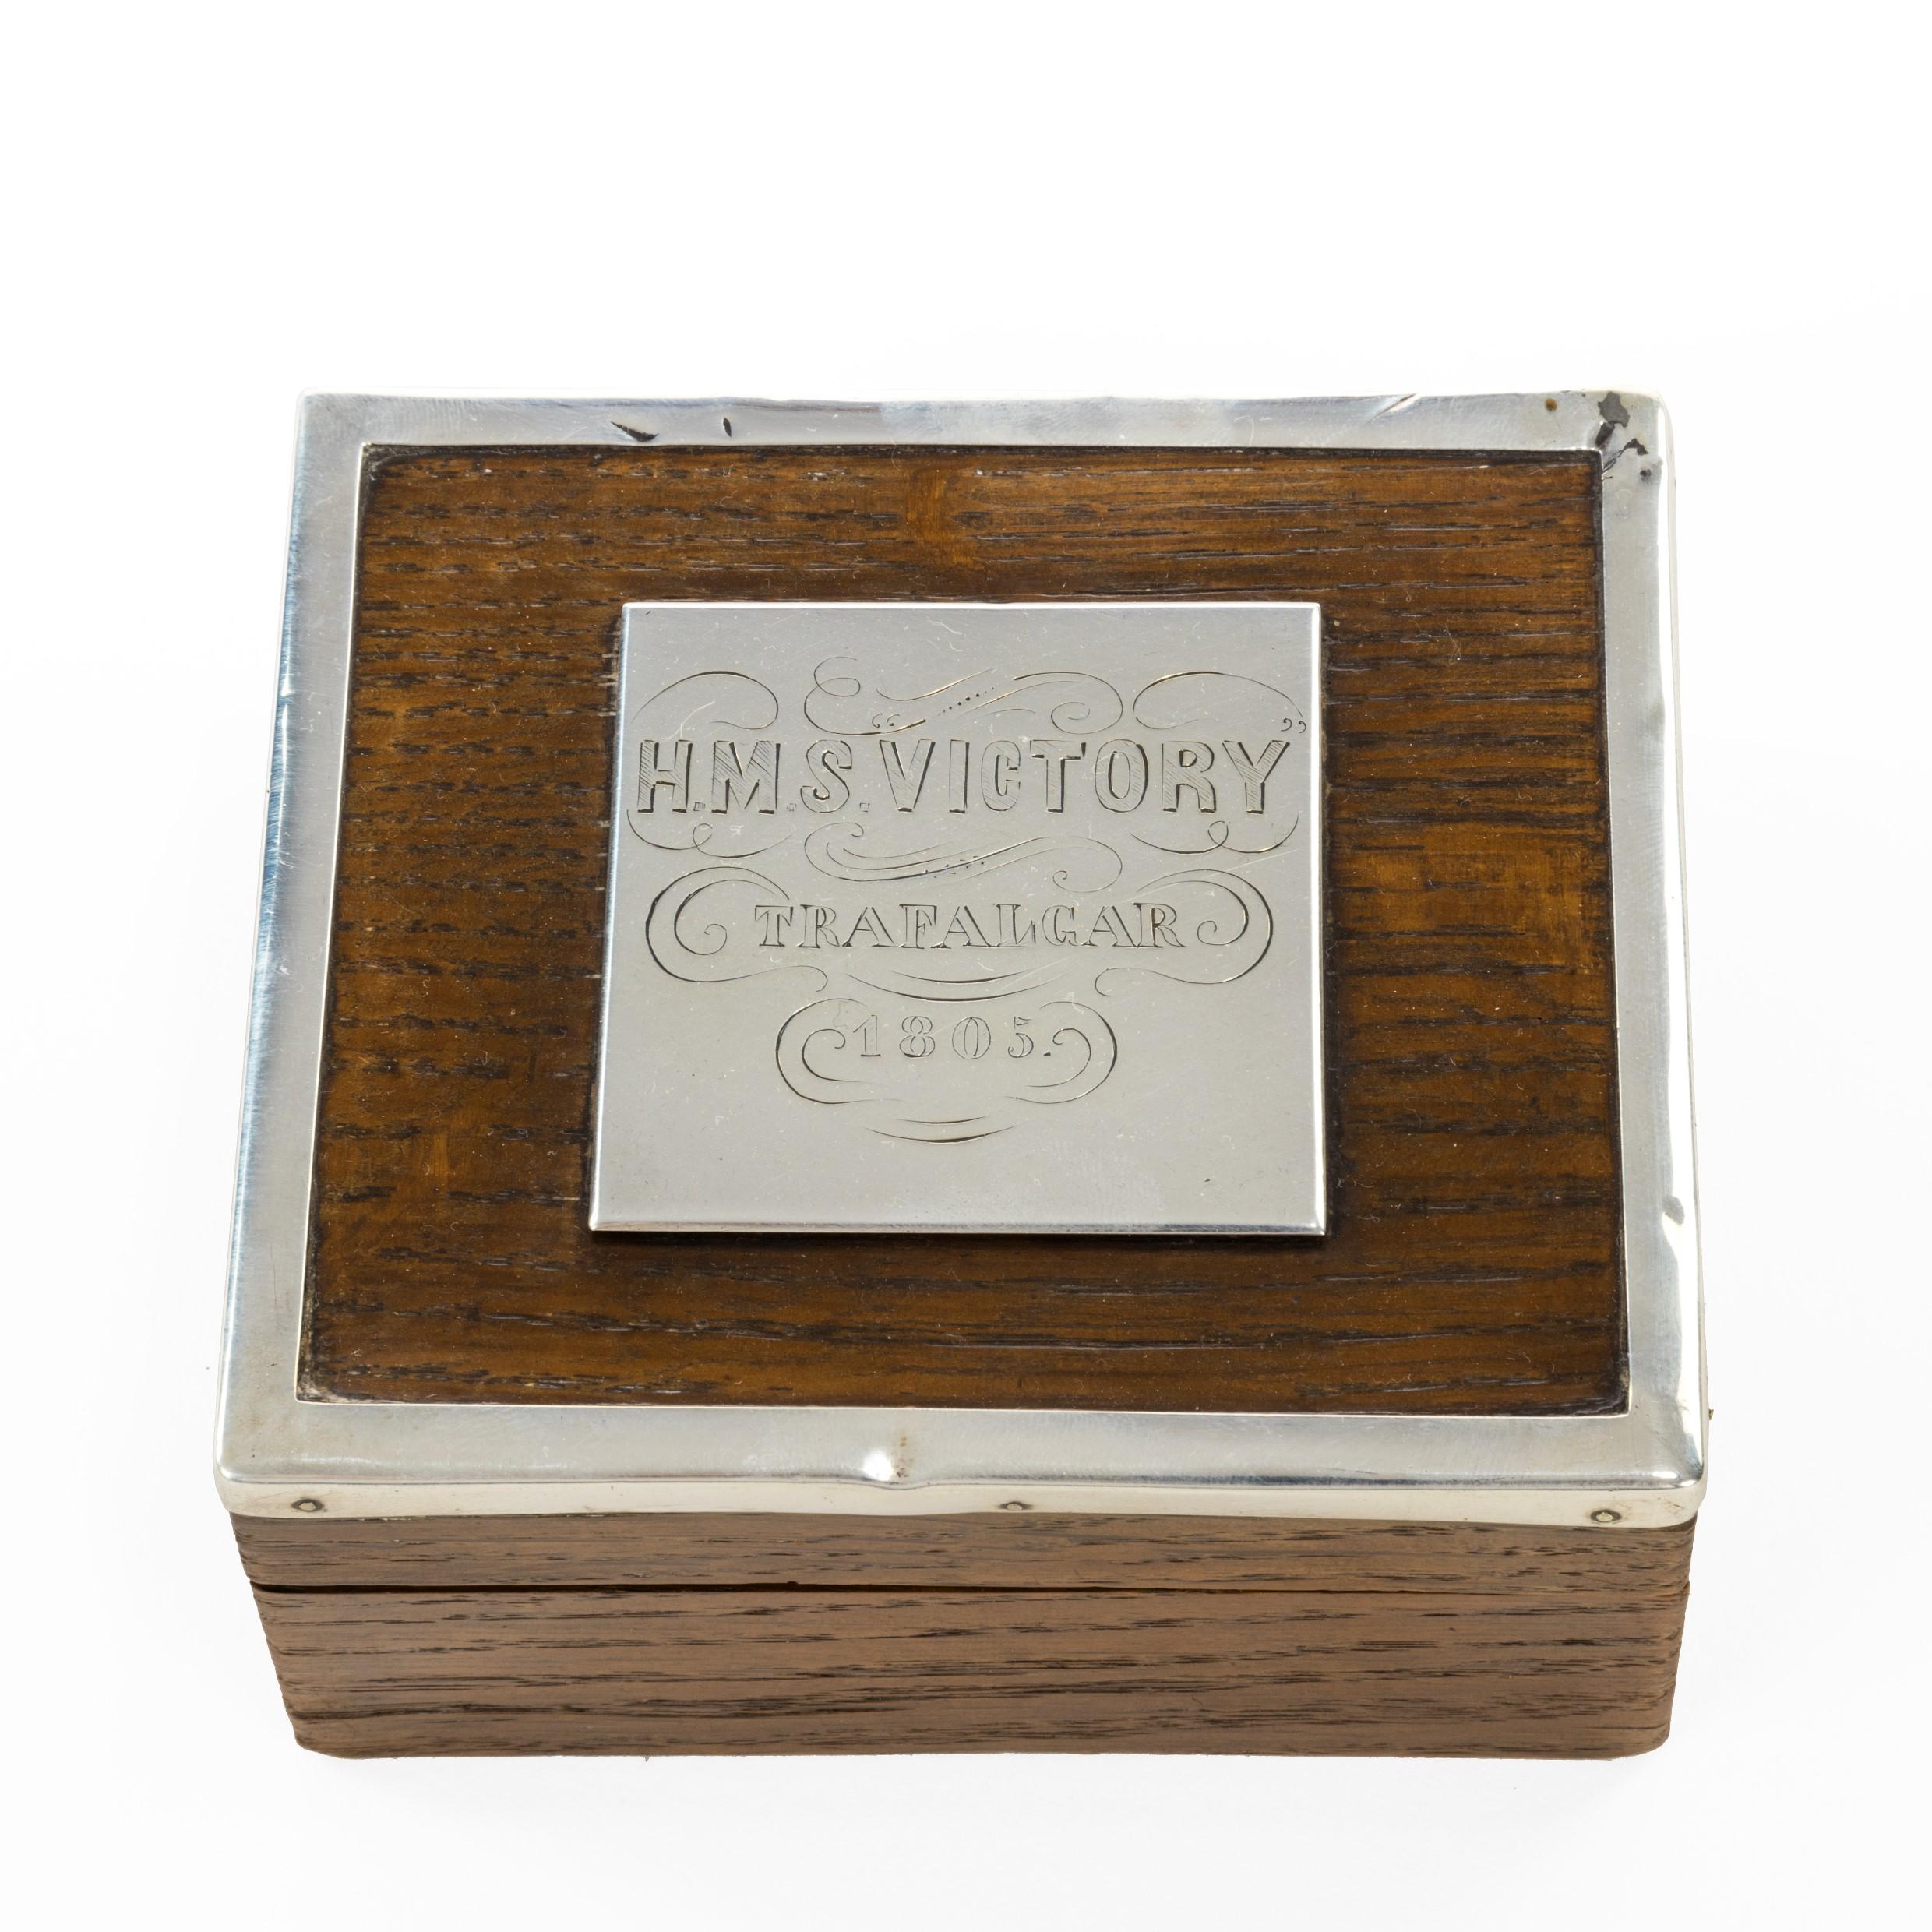 Late 19th Century Silver Mounted Commemorative Box Made from ‘Victory’ Oak